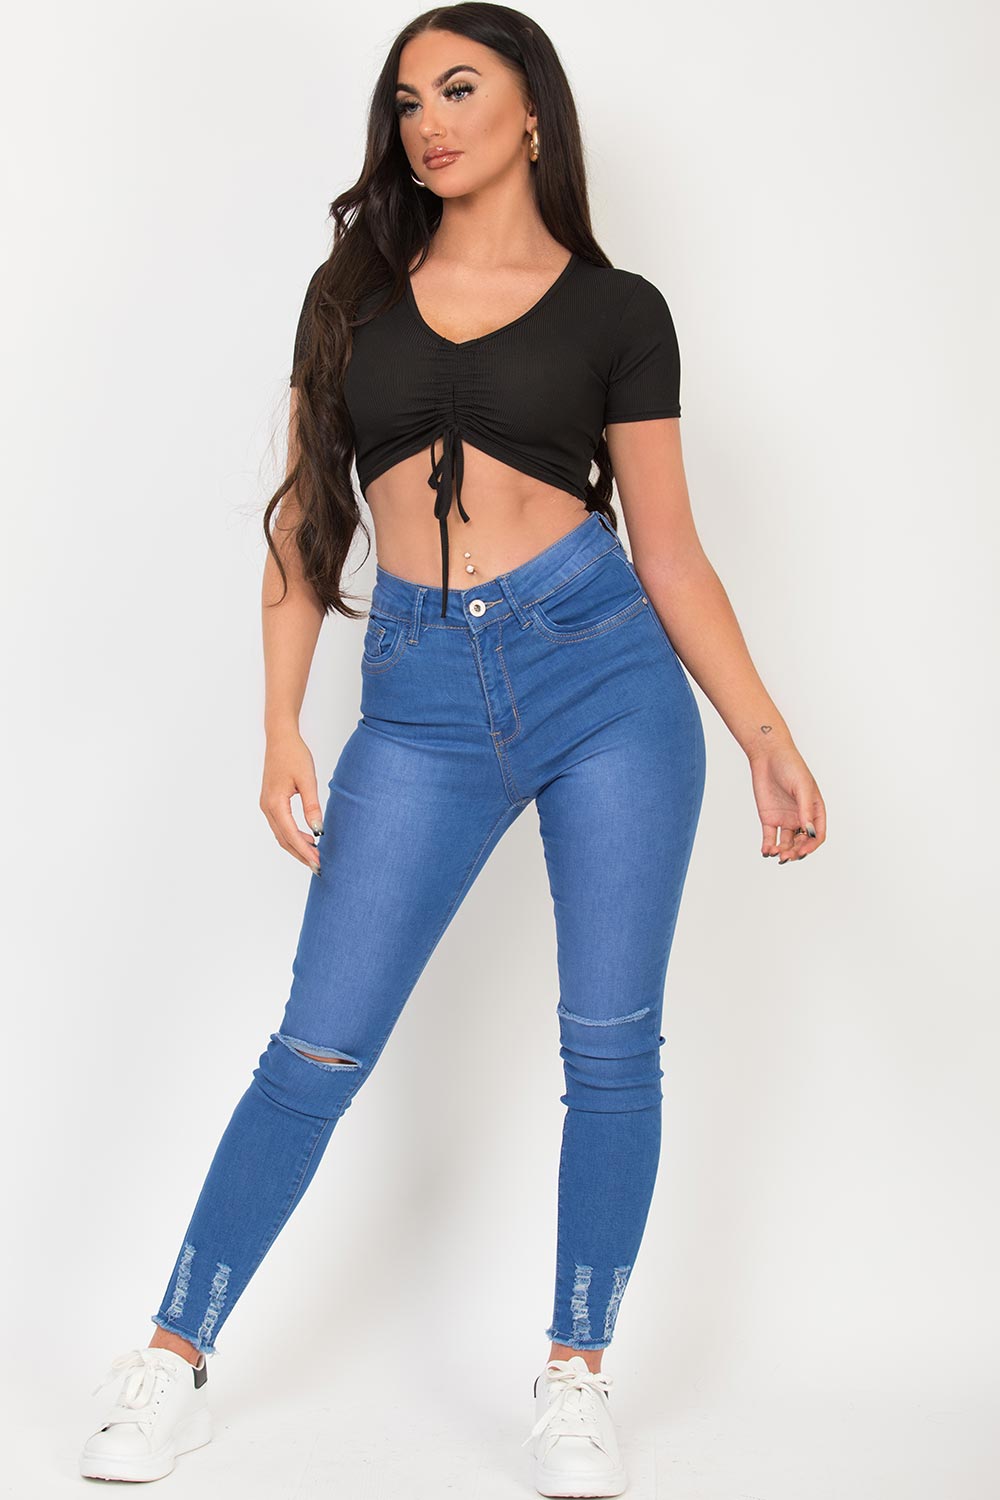 black crop top with drawstring ruched front